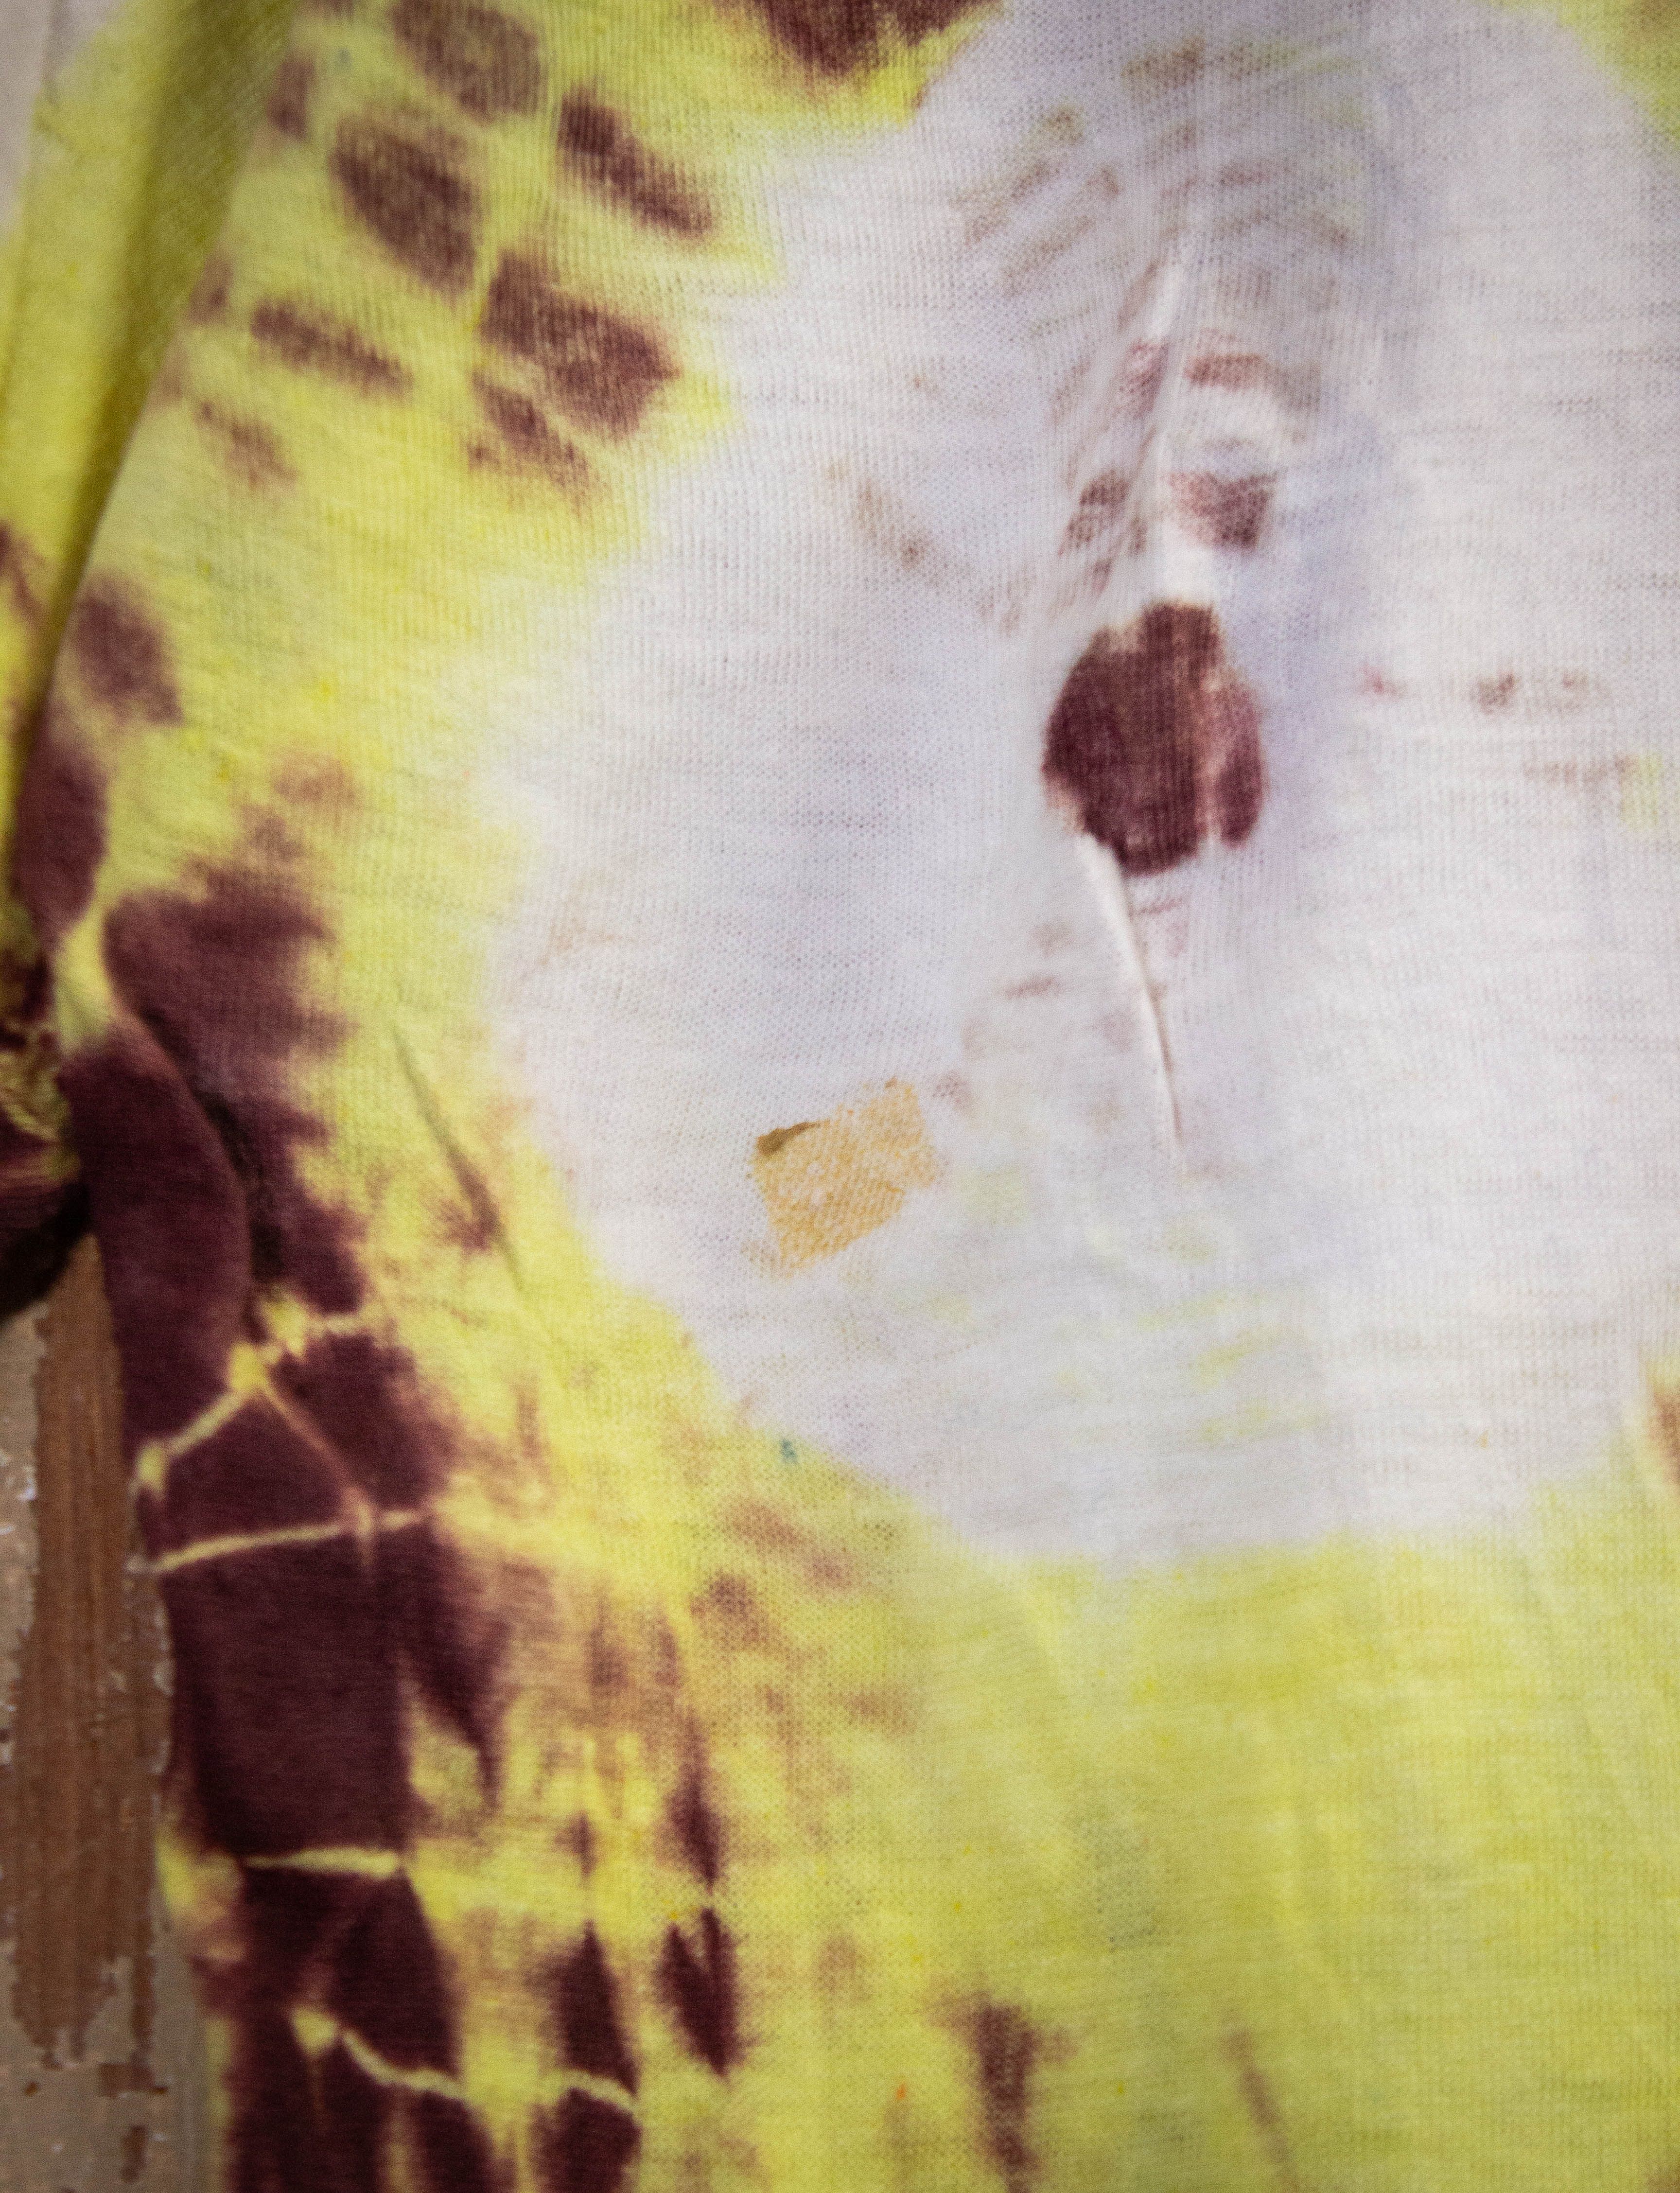 Vintage Vintage Yellow and Brown Tie Dye Shirt 70s Size US S / EU 44-46 / 1 - 5 Preview